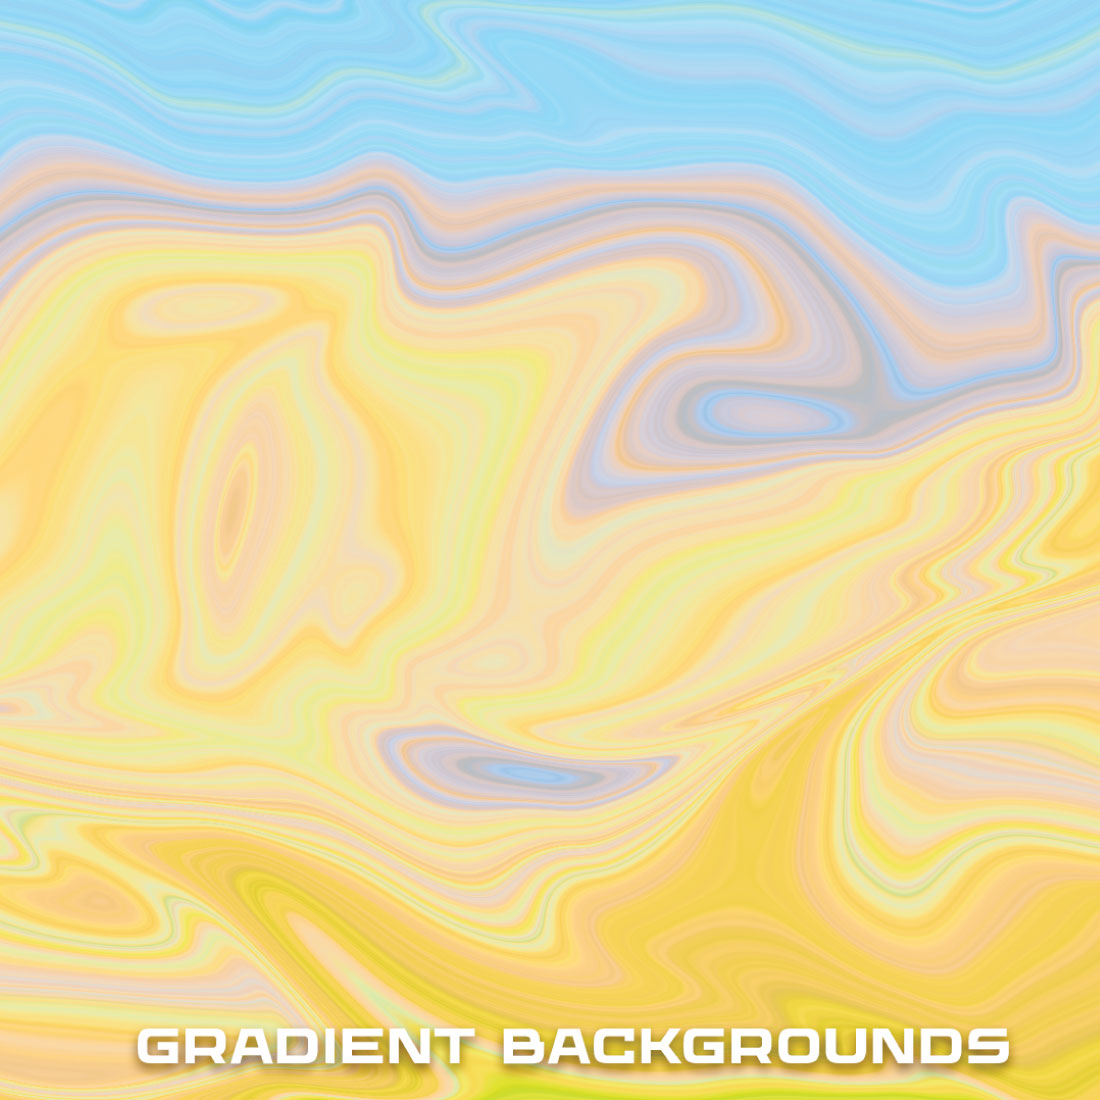 Abstract background with a yellow and blue swirl.